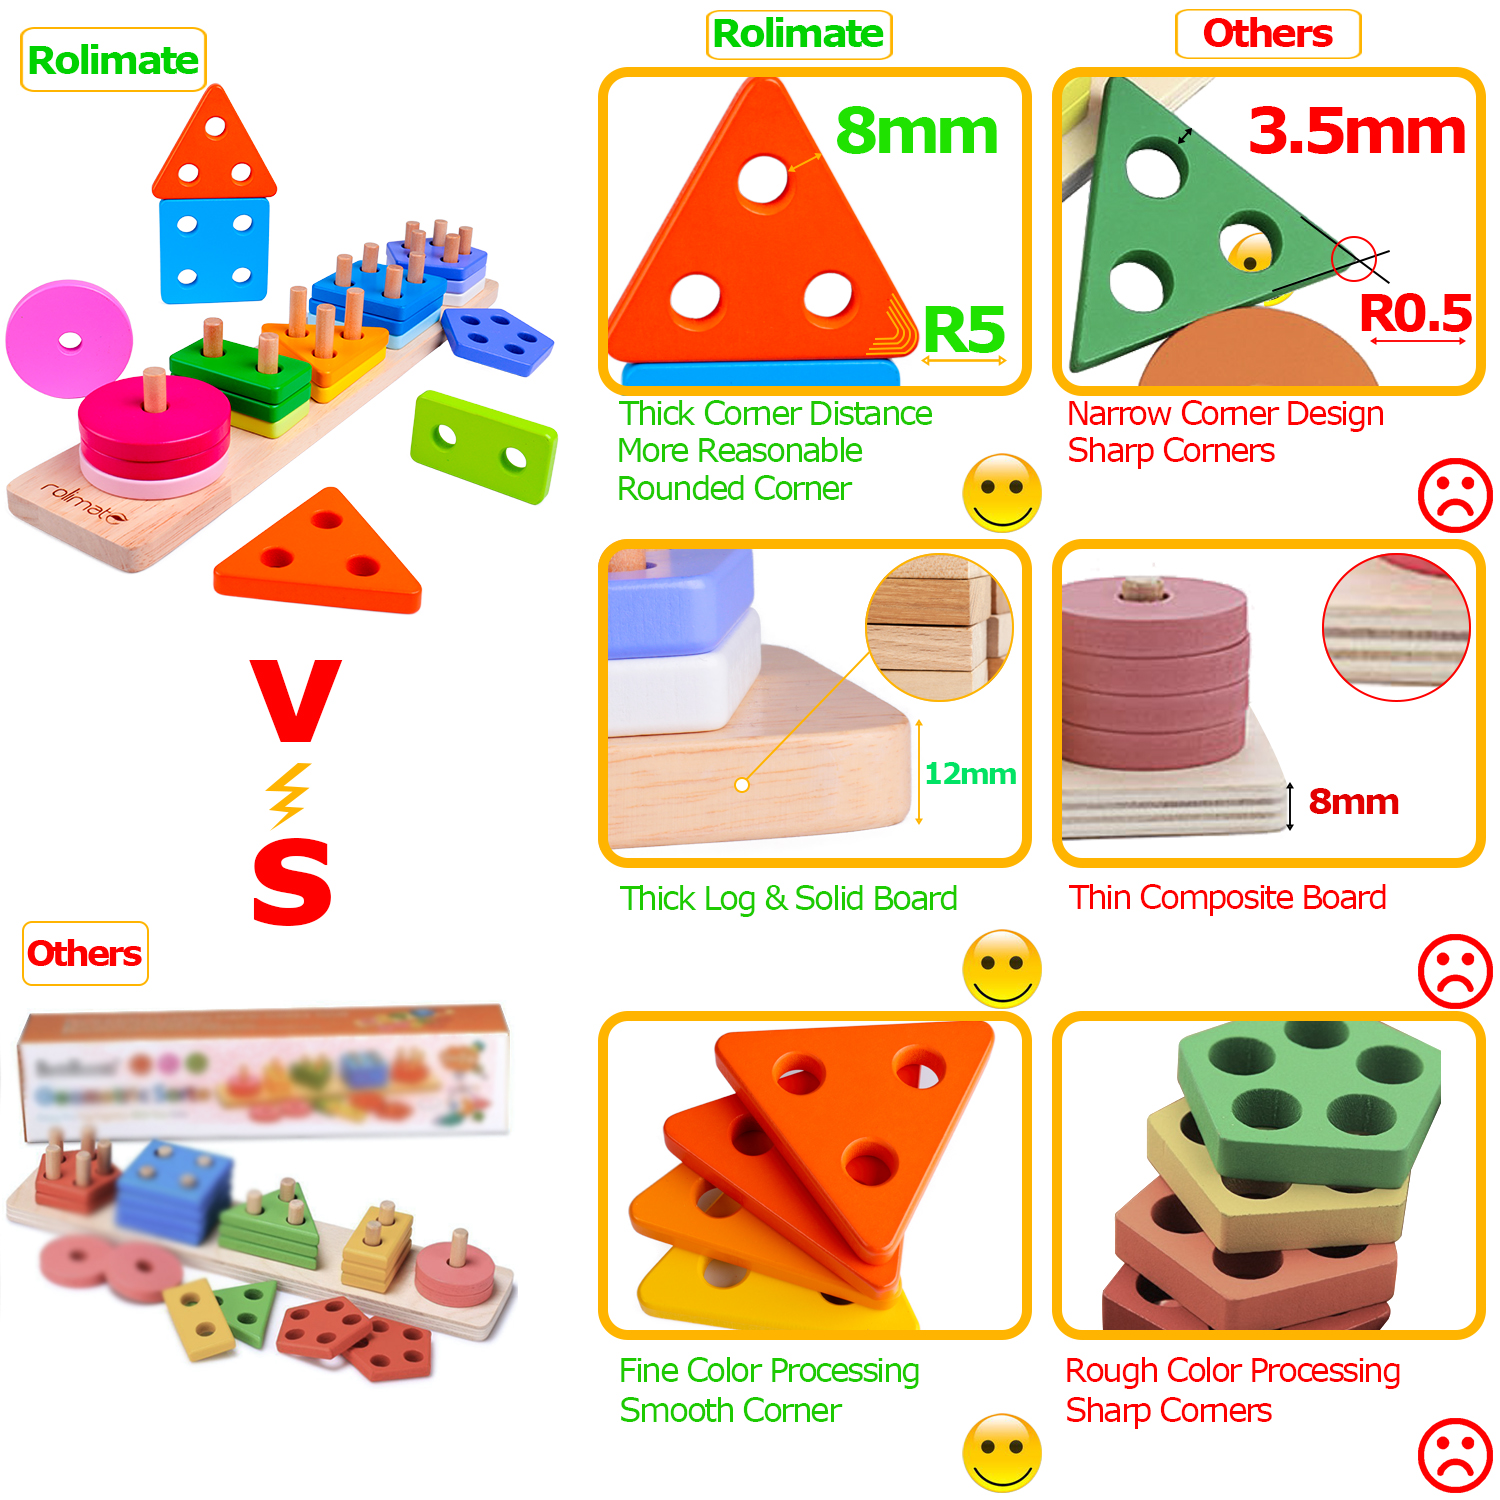 ZY-003 Birthday Gift Toy for Age 3 4 5 Years Old and Up Kid Children Baby Toddler Boy Girl rolimate Wooden Educational Shape Color Recognition Geometric Board Block Stack Sort Chunky Puzzle Toys 